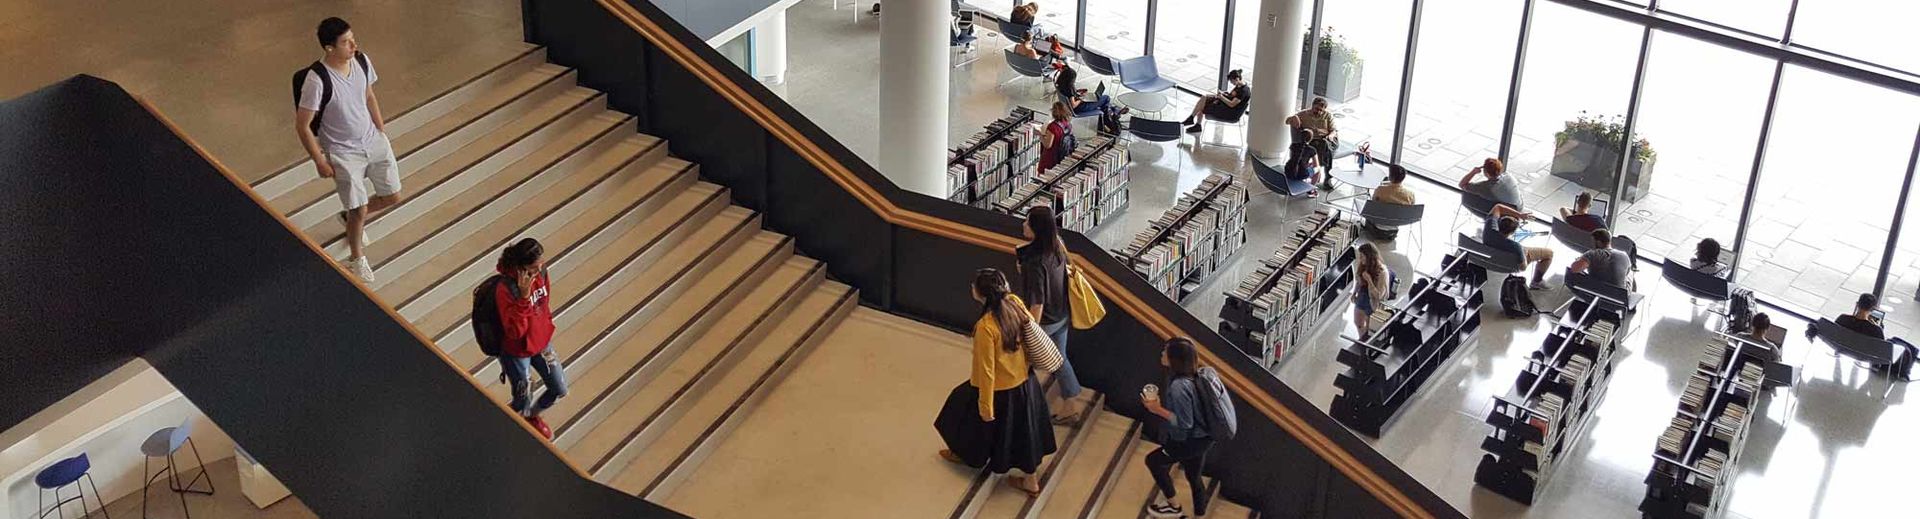 students and others moving through bright, open library space with staircase and soaring ceilings